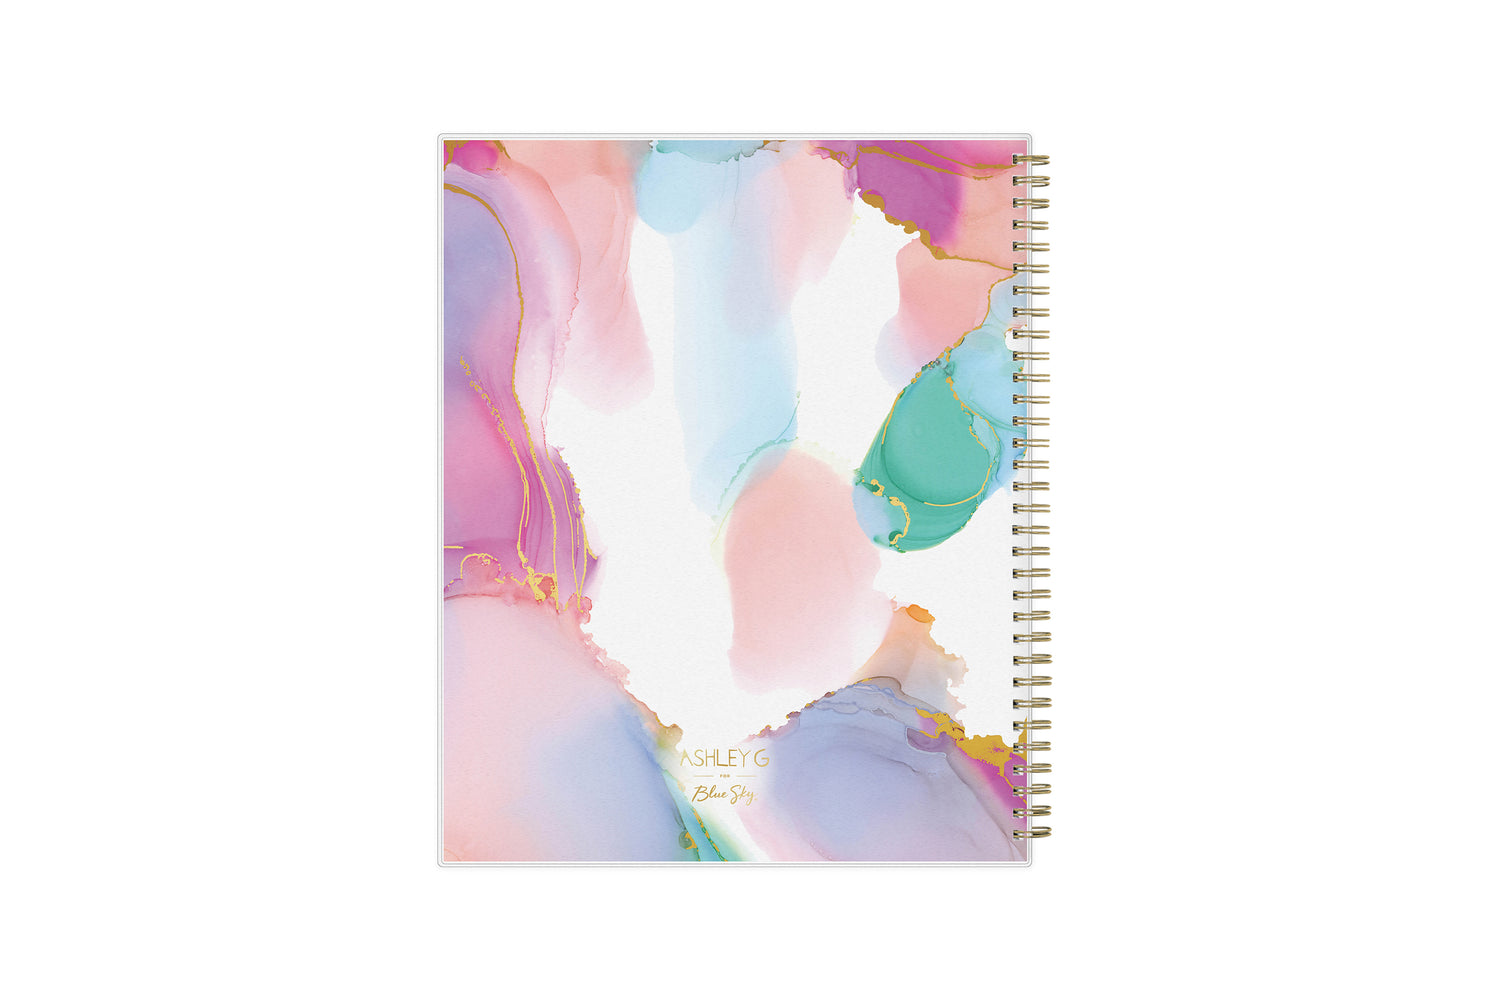 2023-2024 weekly monthly planner by Ashley g for blue sky featuring a marble like pattern back cover and gold twin wire-o binding in 8.5x11 size